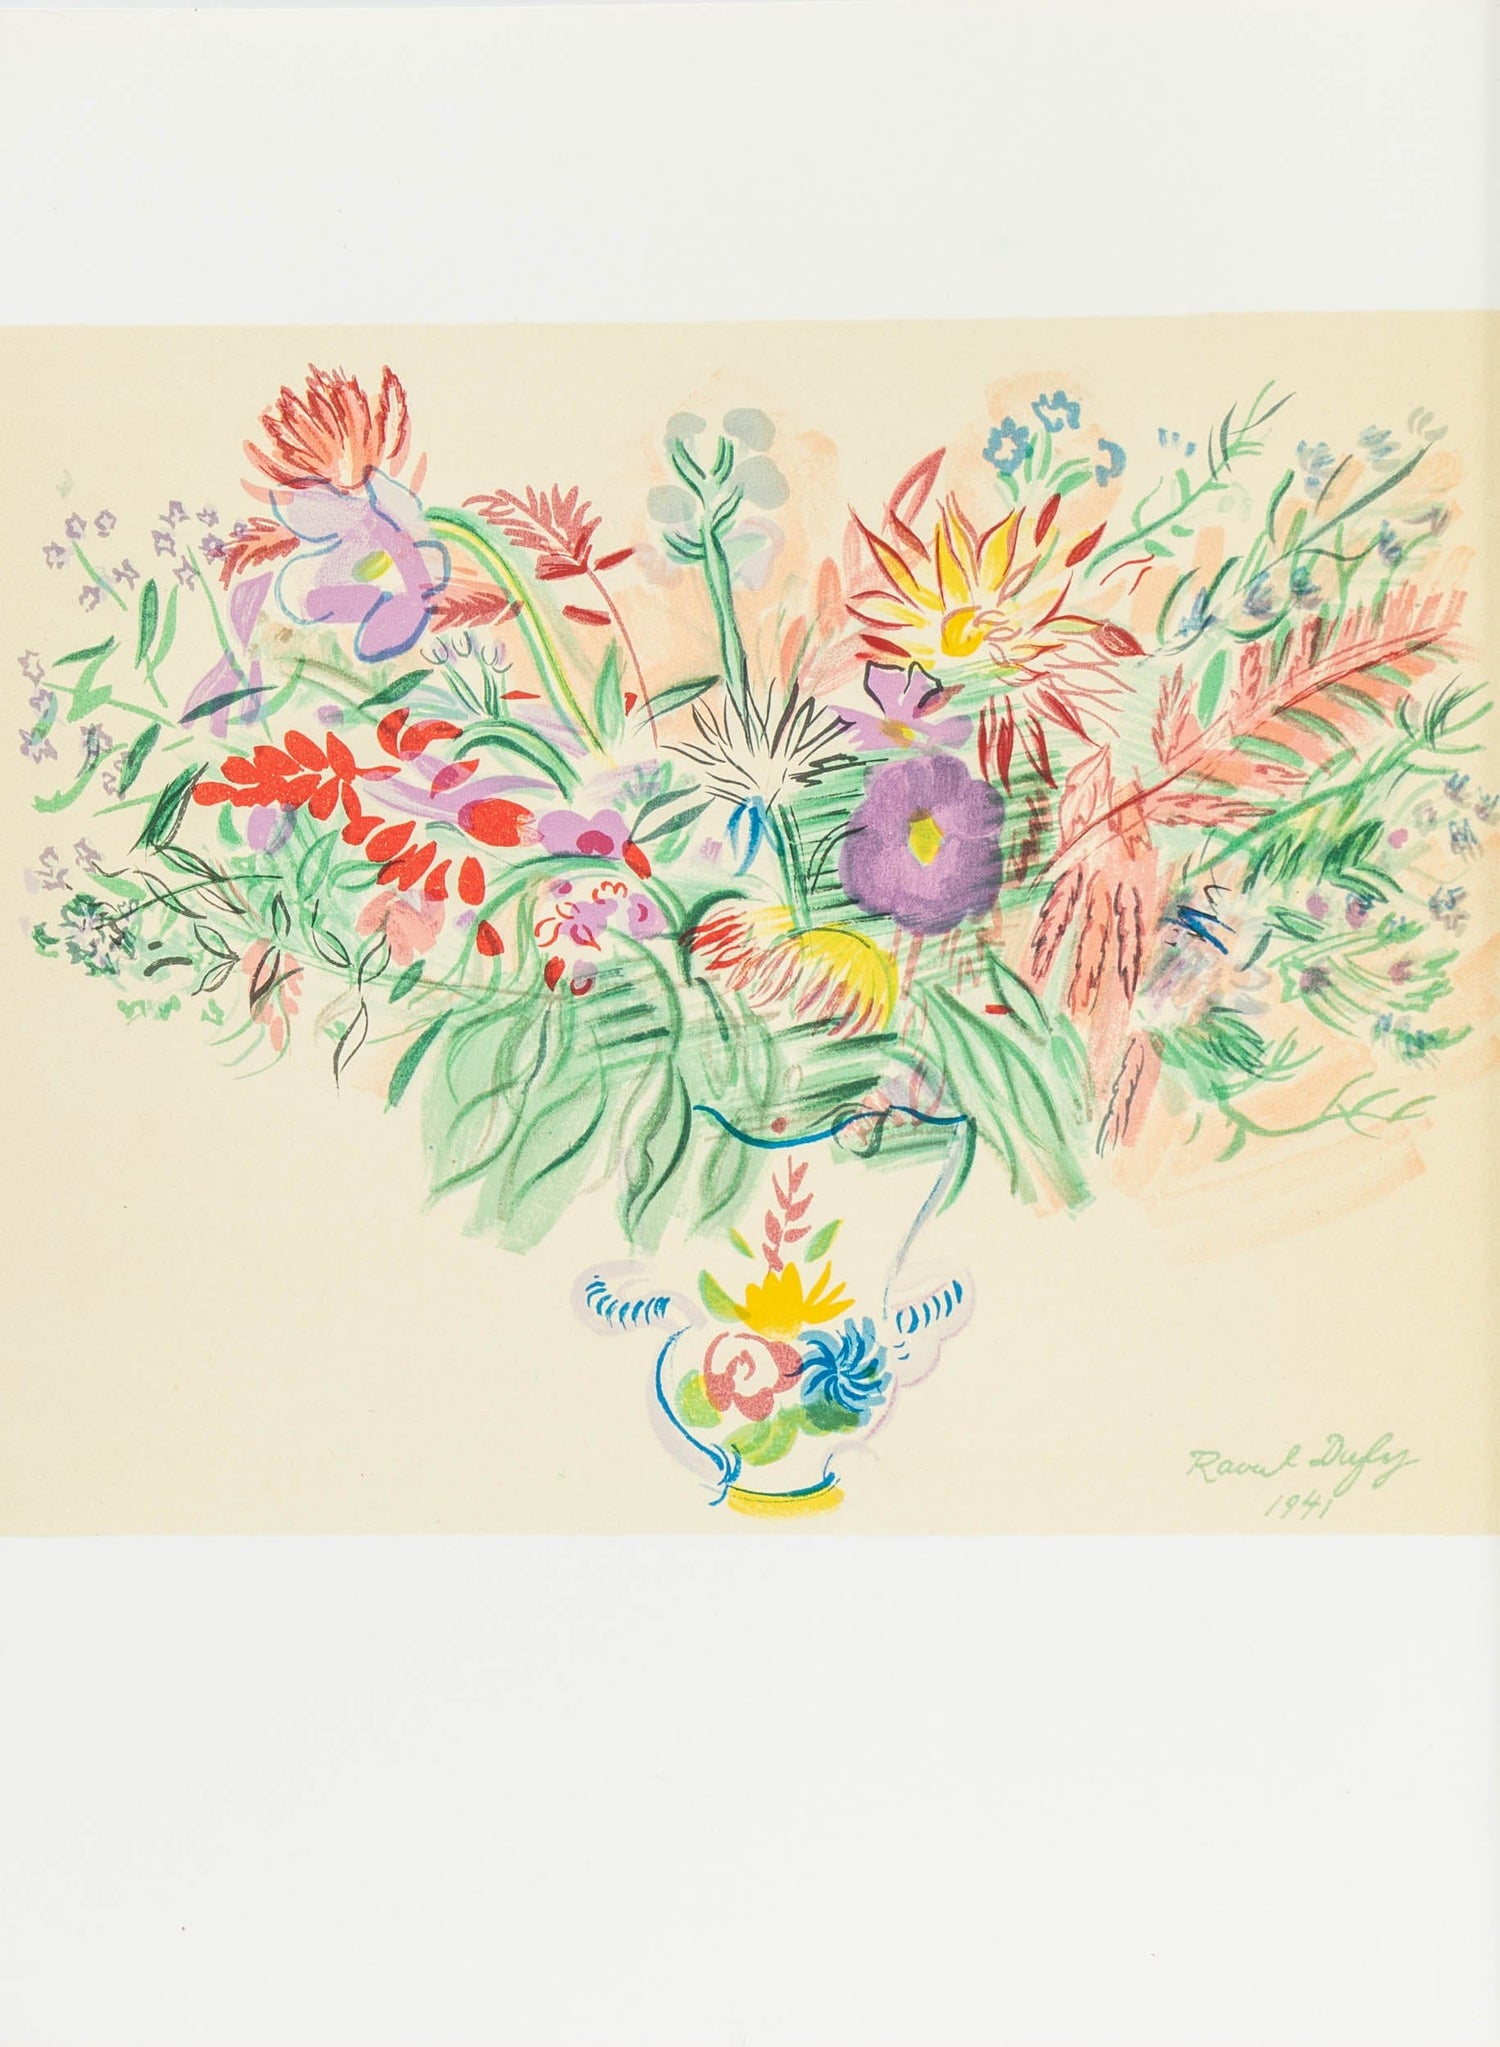 Raoul Dufy - Bouquet of Flowers from Les Peintres Mes Amis ZOOM